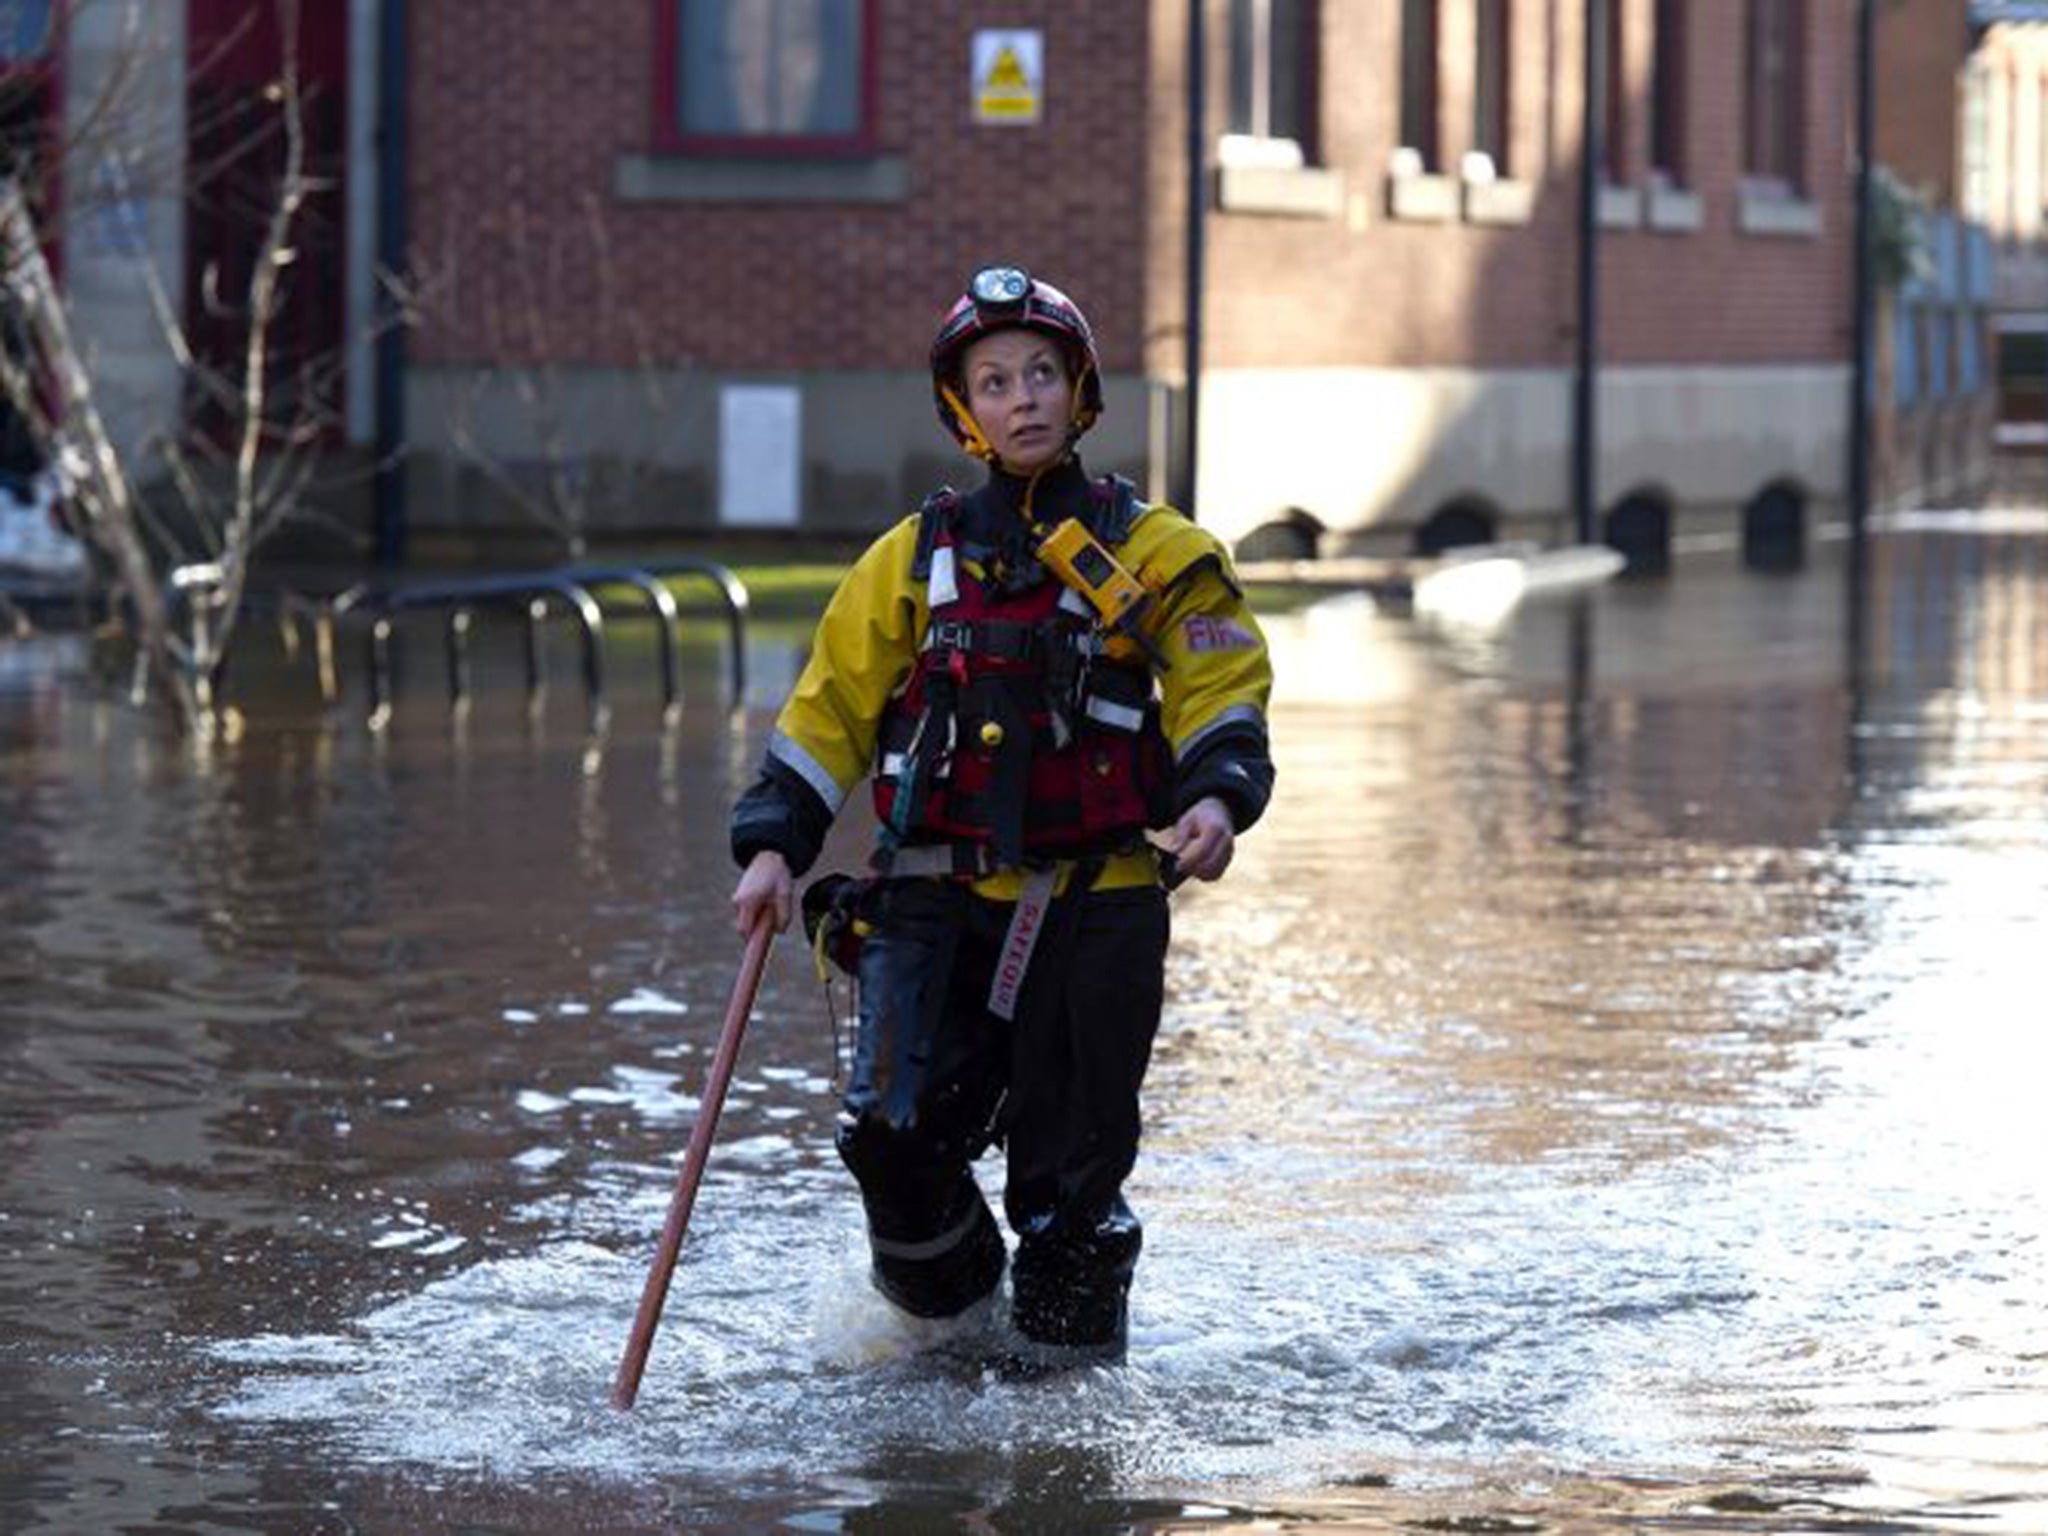 Rescue crews use poles to check the depth of the flood water in Skeldergate on December 29